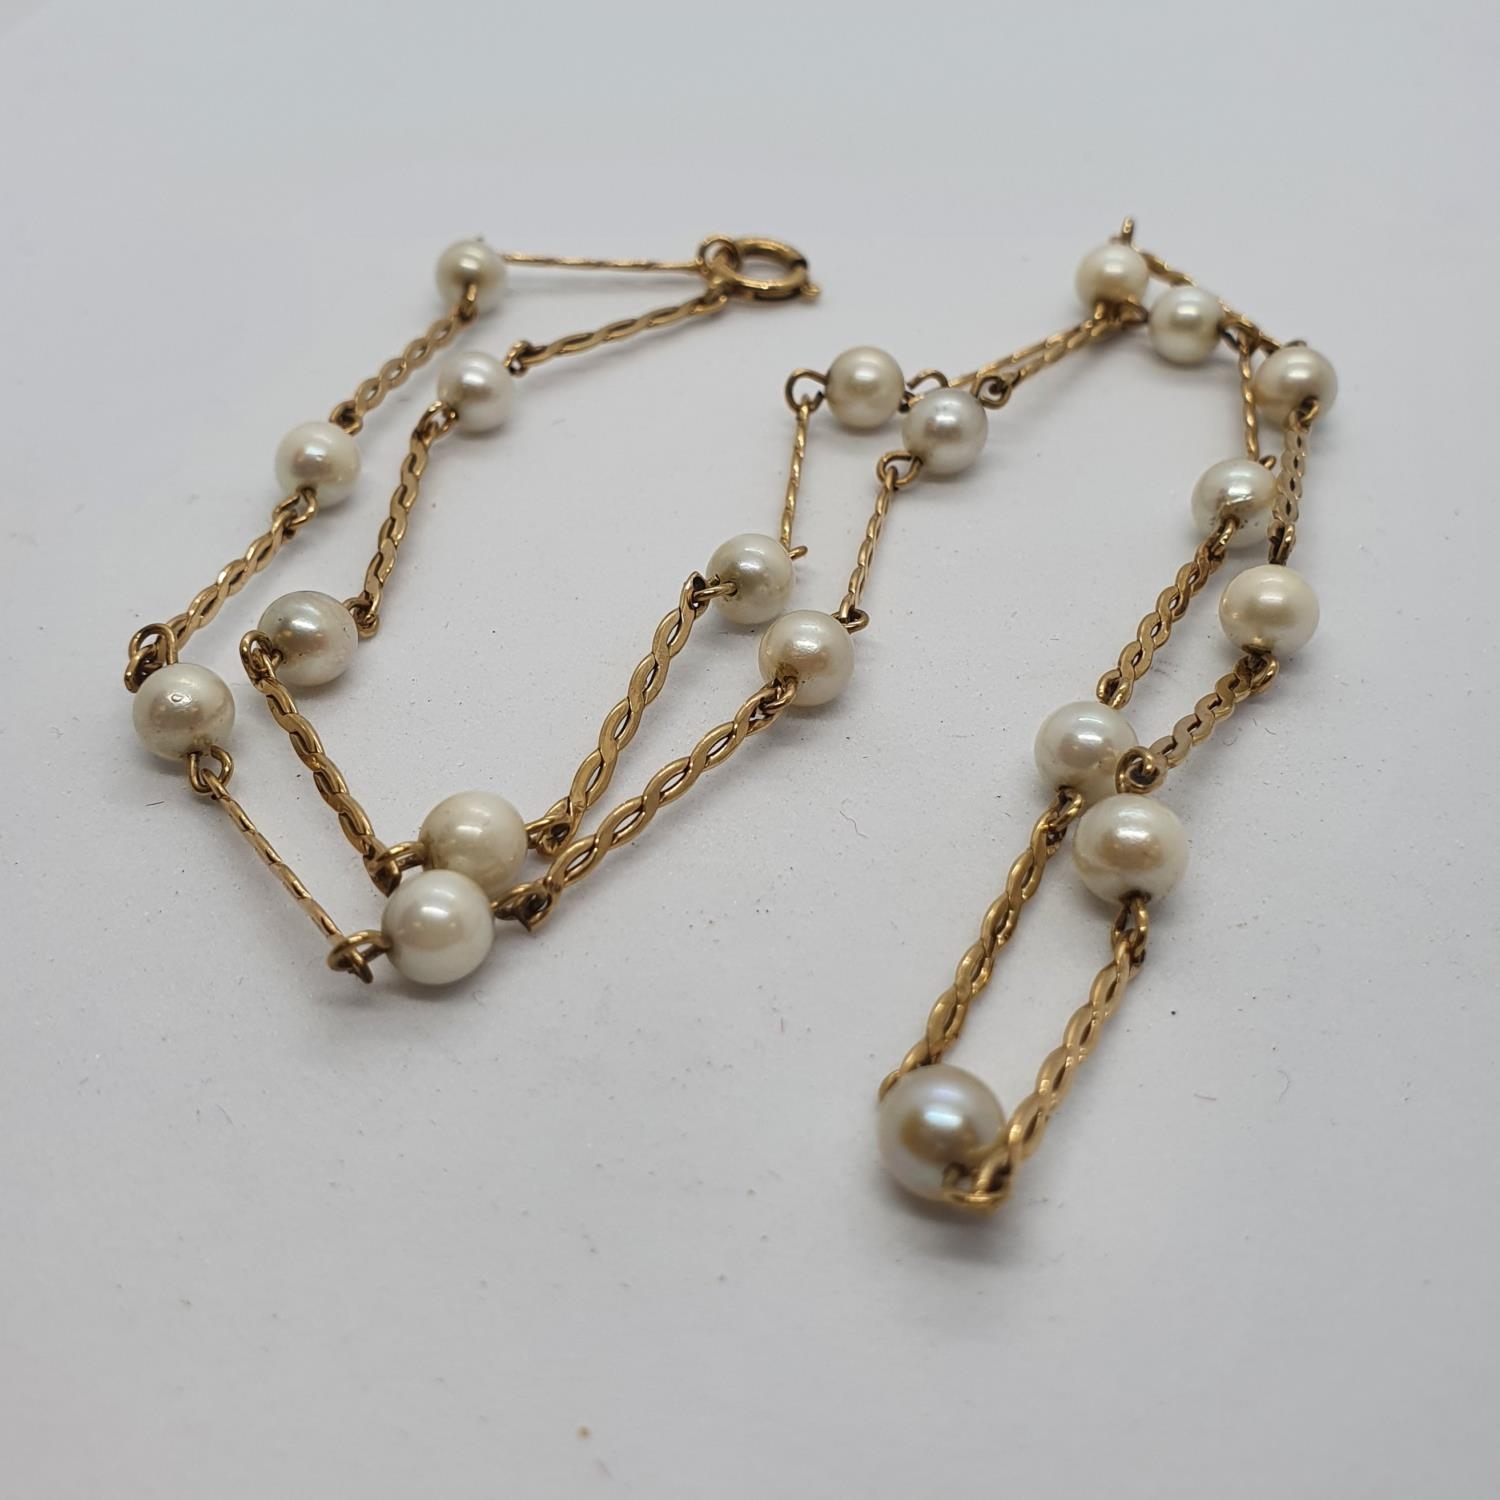 A 9ct gold and cultured pearl necklace - Image 2 of 2